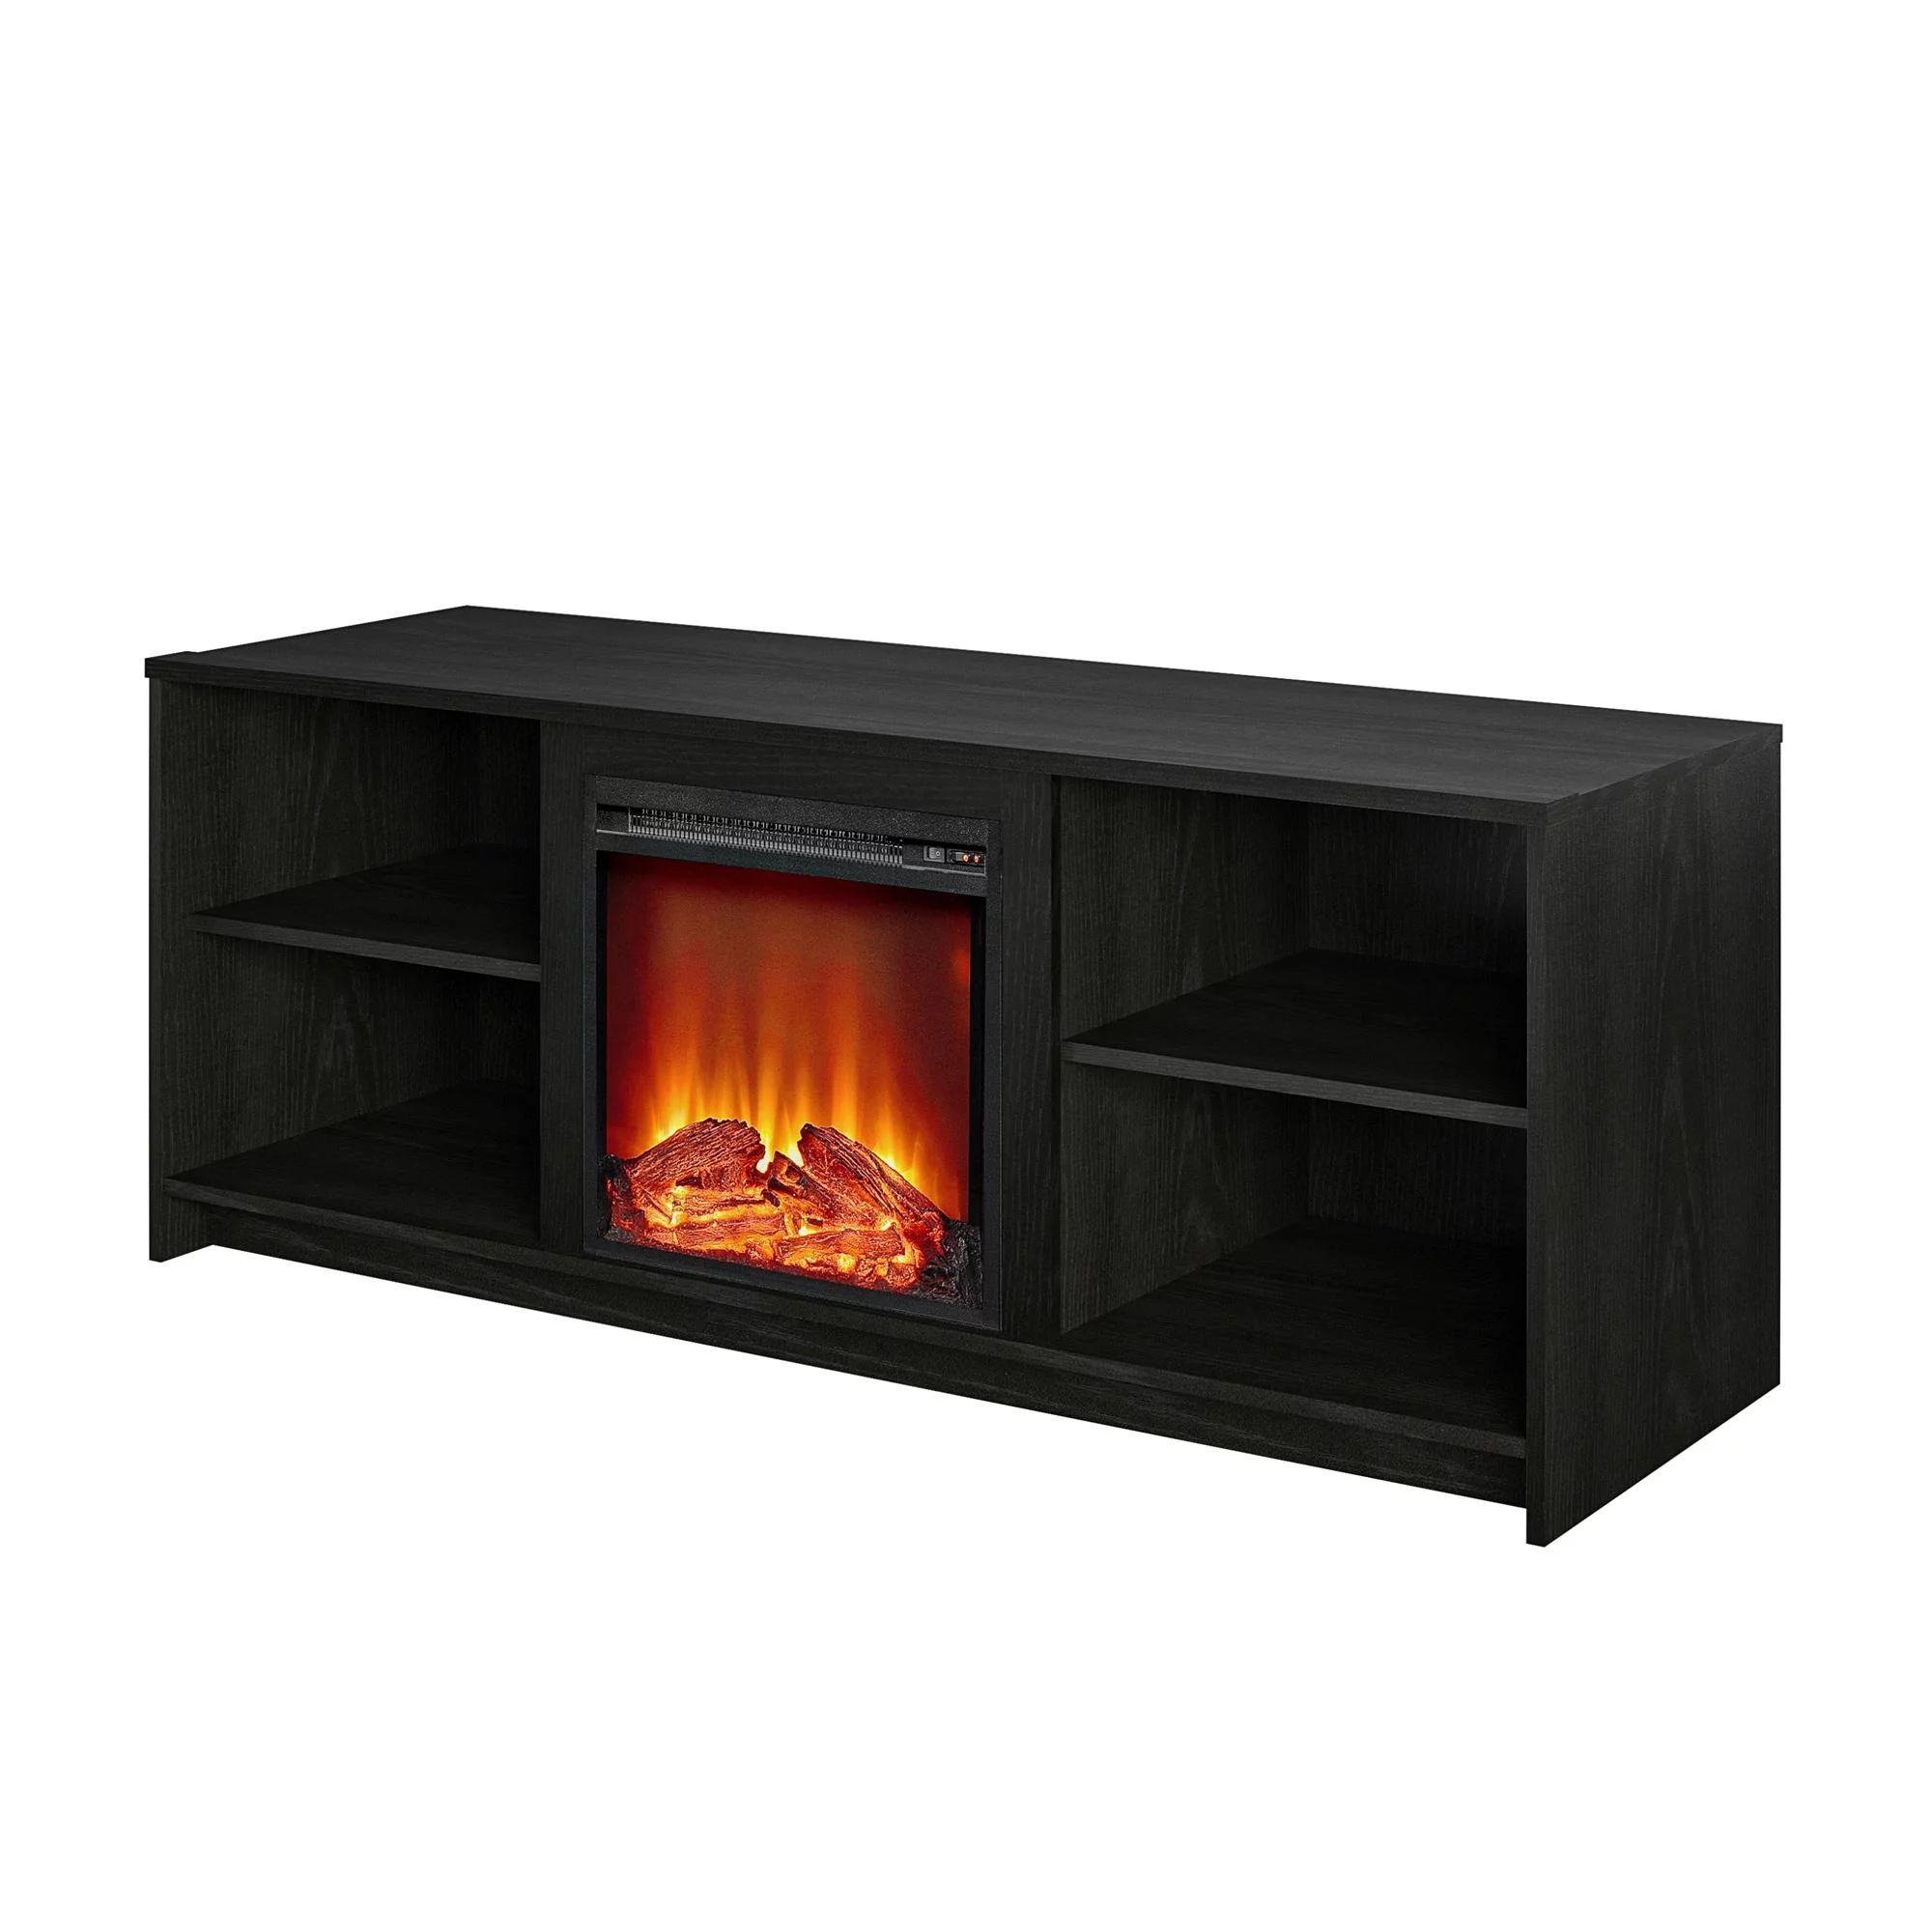 Mainstays Fireplace TV Stand for TVs up to 65", Black Oak | Walmart (US)